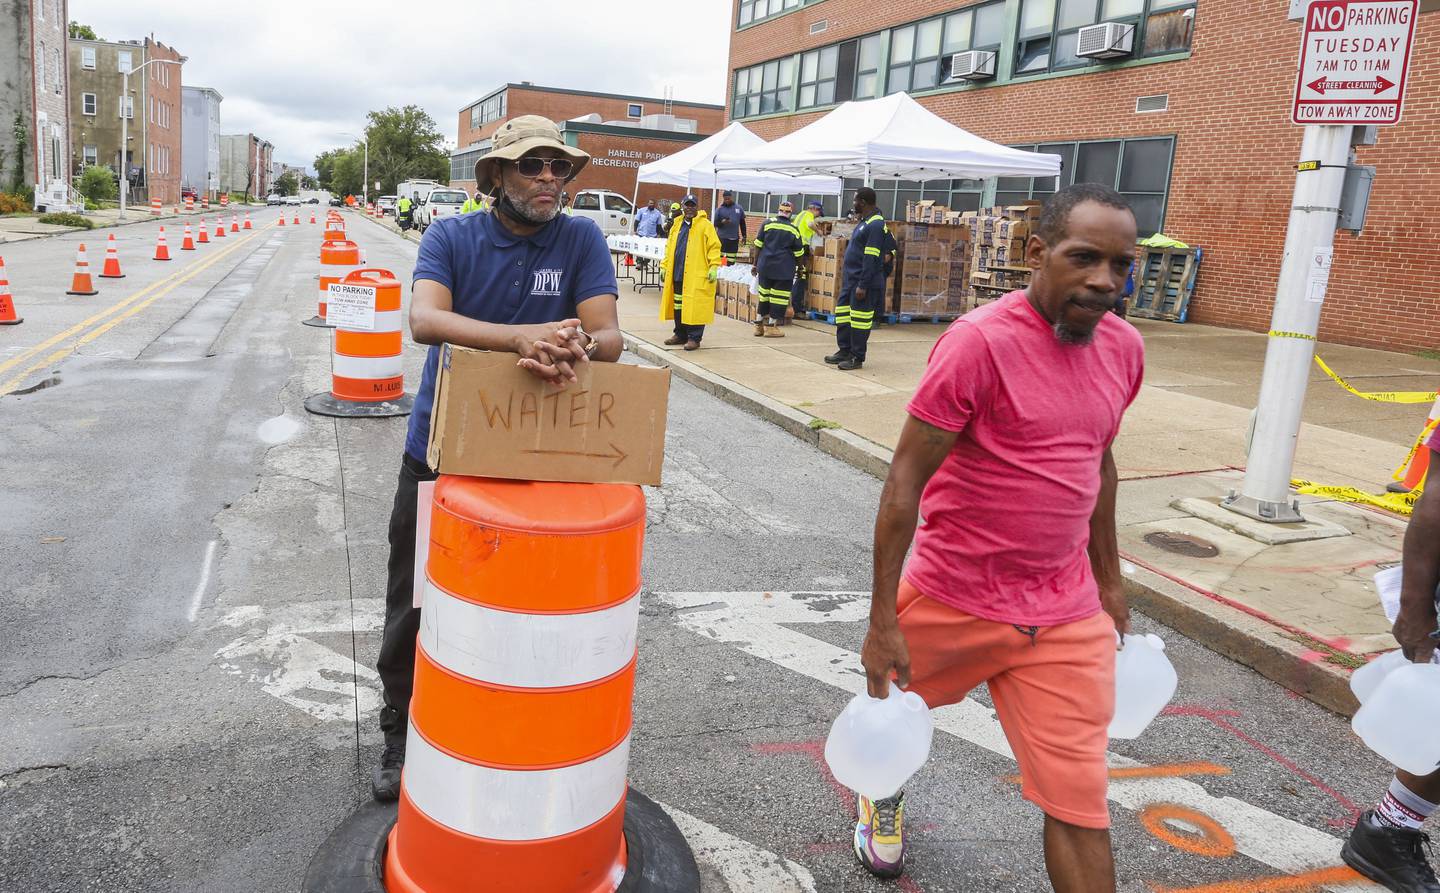 Charles Jackson of DPW guides residents to the water line where each resident received several gallons of water. Baltimore officials are advising residents of the Sandtown-Winchester and Harlem Park neighborhoods to boil their water before drinking it. E.coli was detected in samples taken from three addresses.